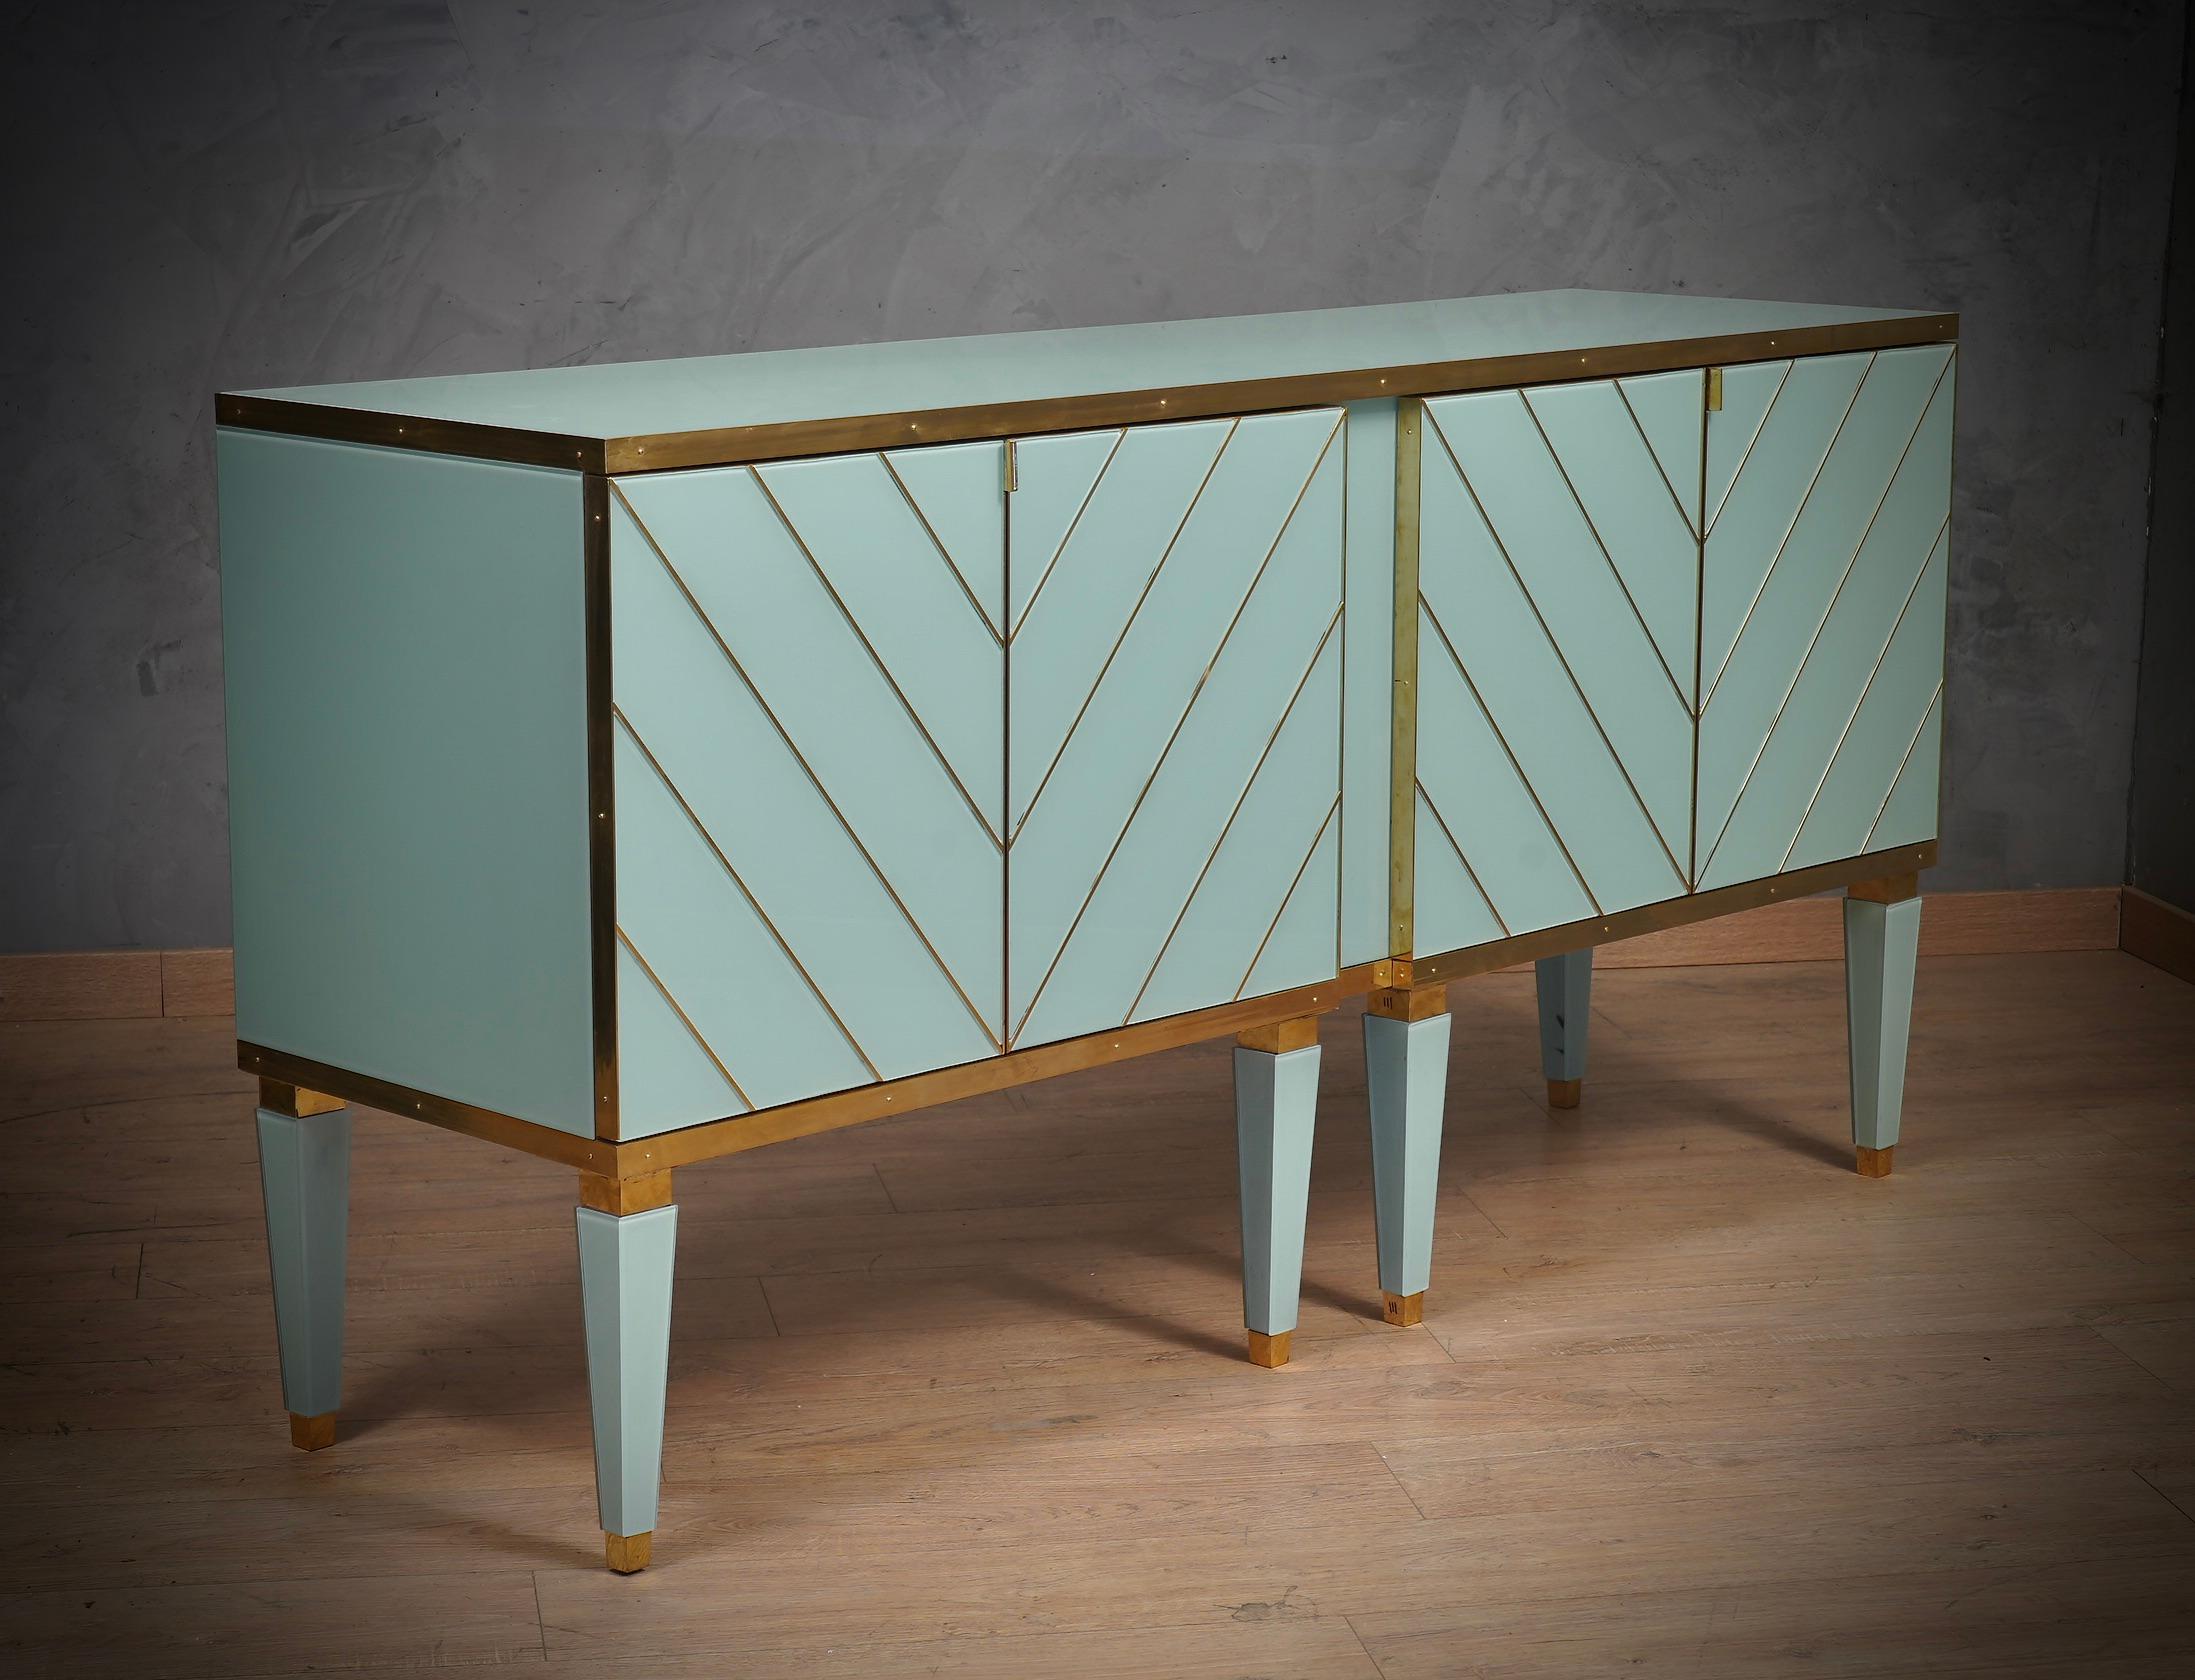 Very particular sideboard in aqua green glass beautifully finished with brass rods. Very elegant door design.

The sideboard has a wooden structure, and was externally plated with aqua green glass and then edged with polished brass finishes. Brass